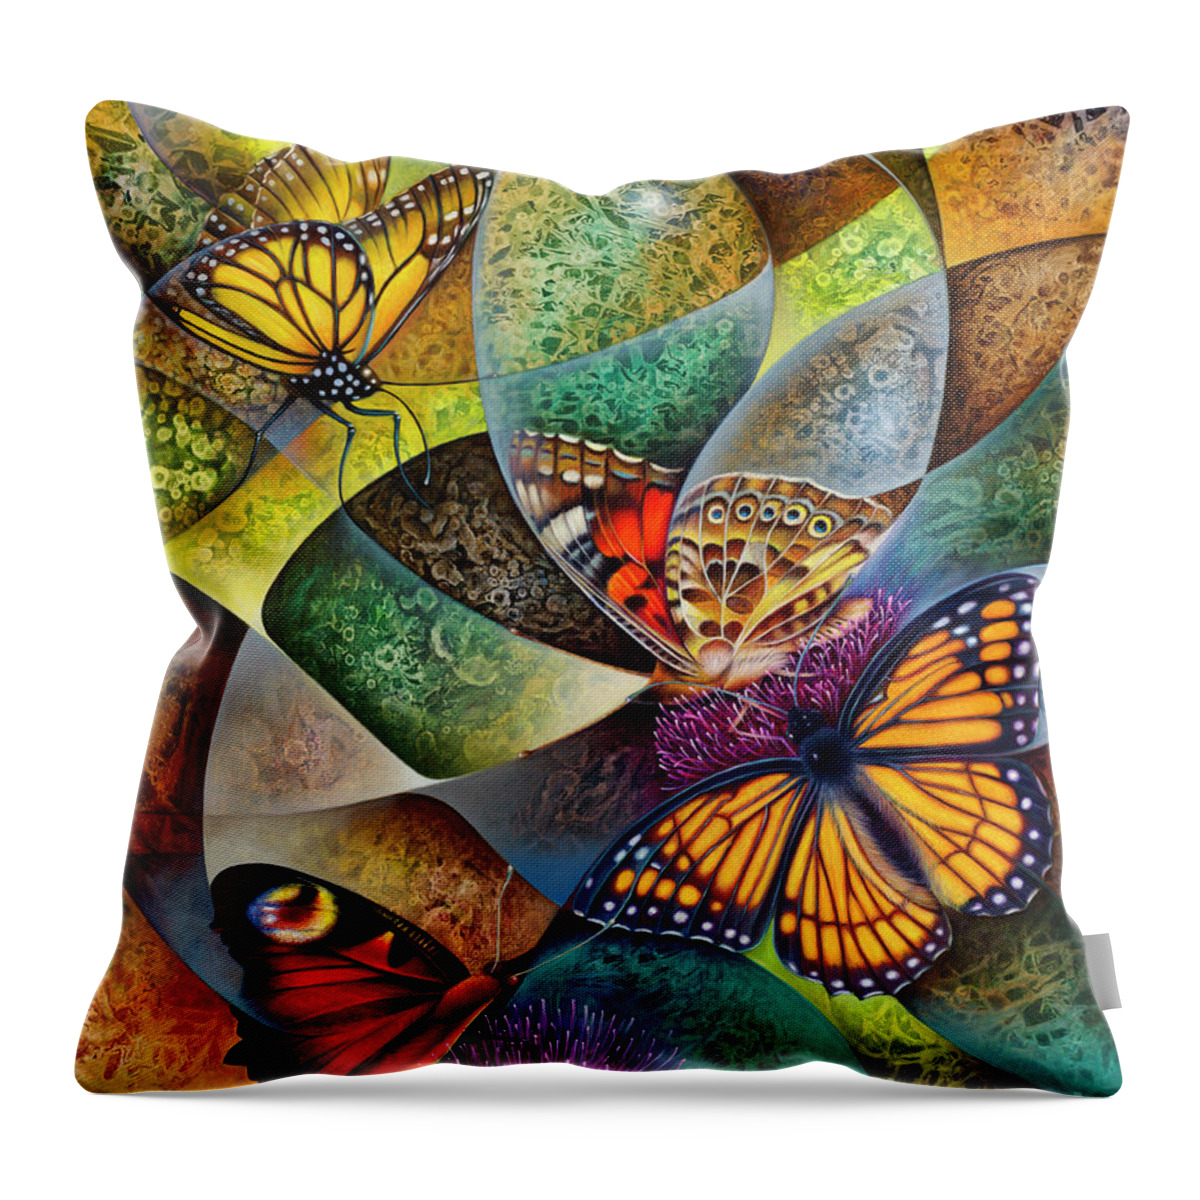 Butterflies Throw Pillow featuring the painting Dynamic Papalotl Series 2 - Diptych by Ricardo Chavez-Mendez